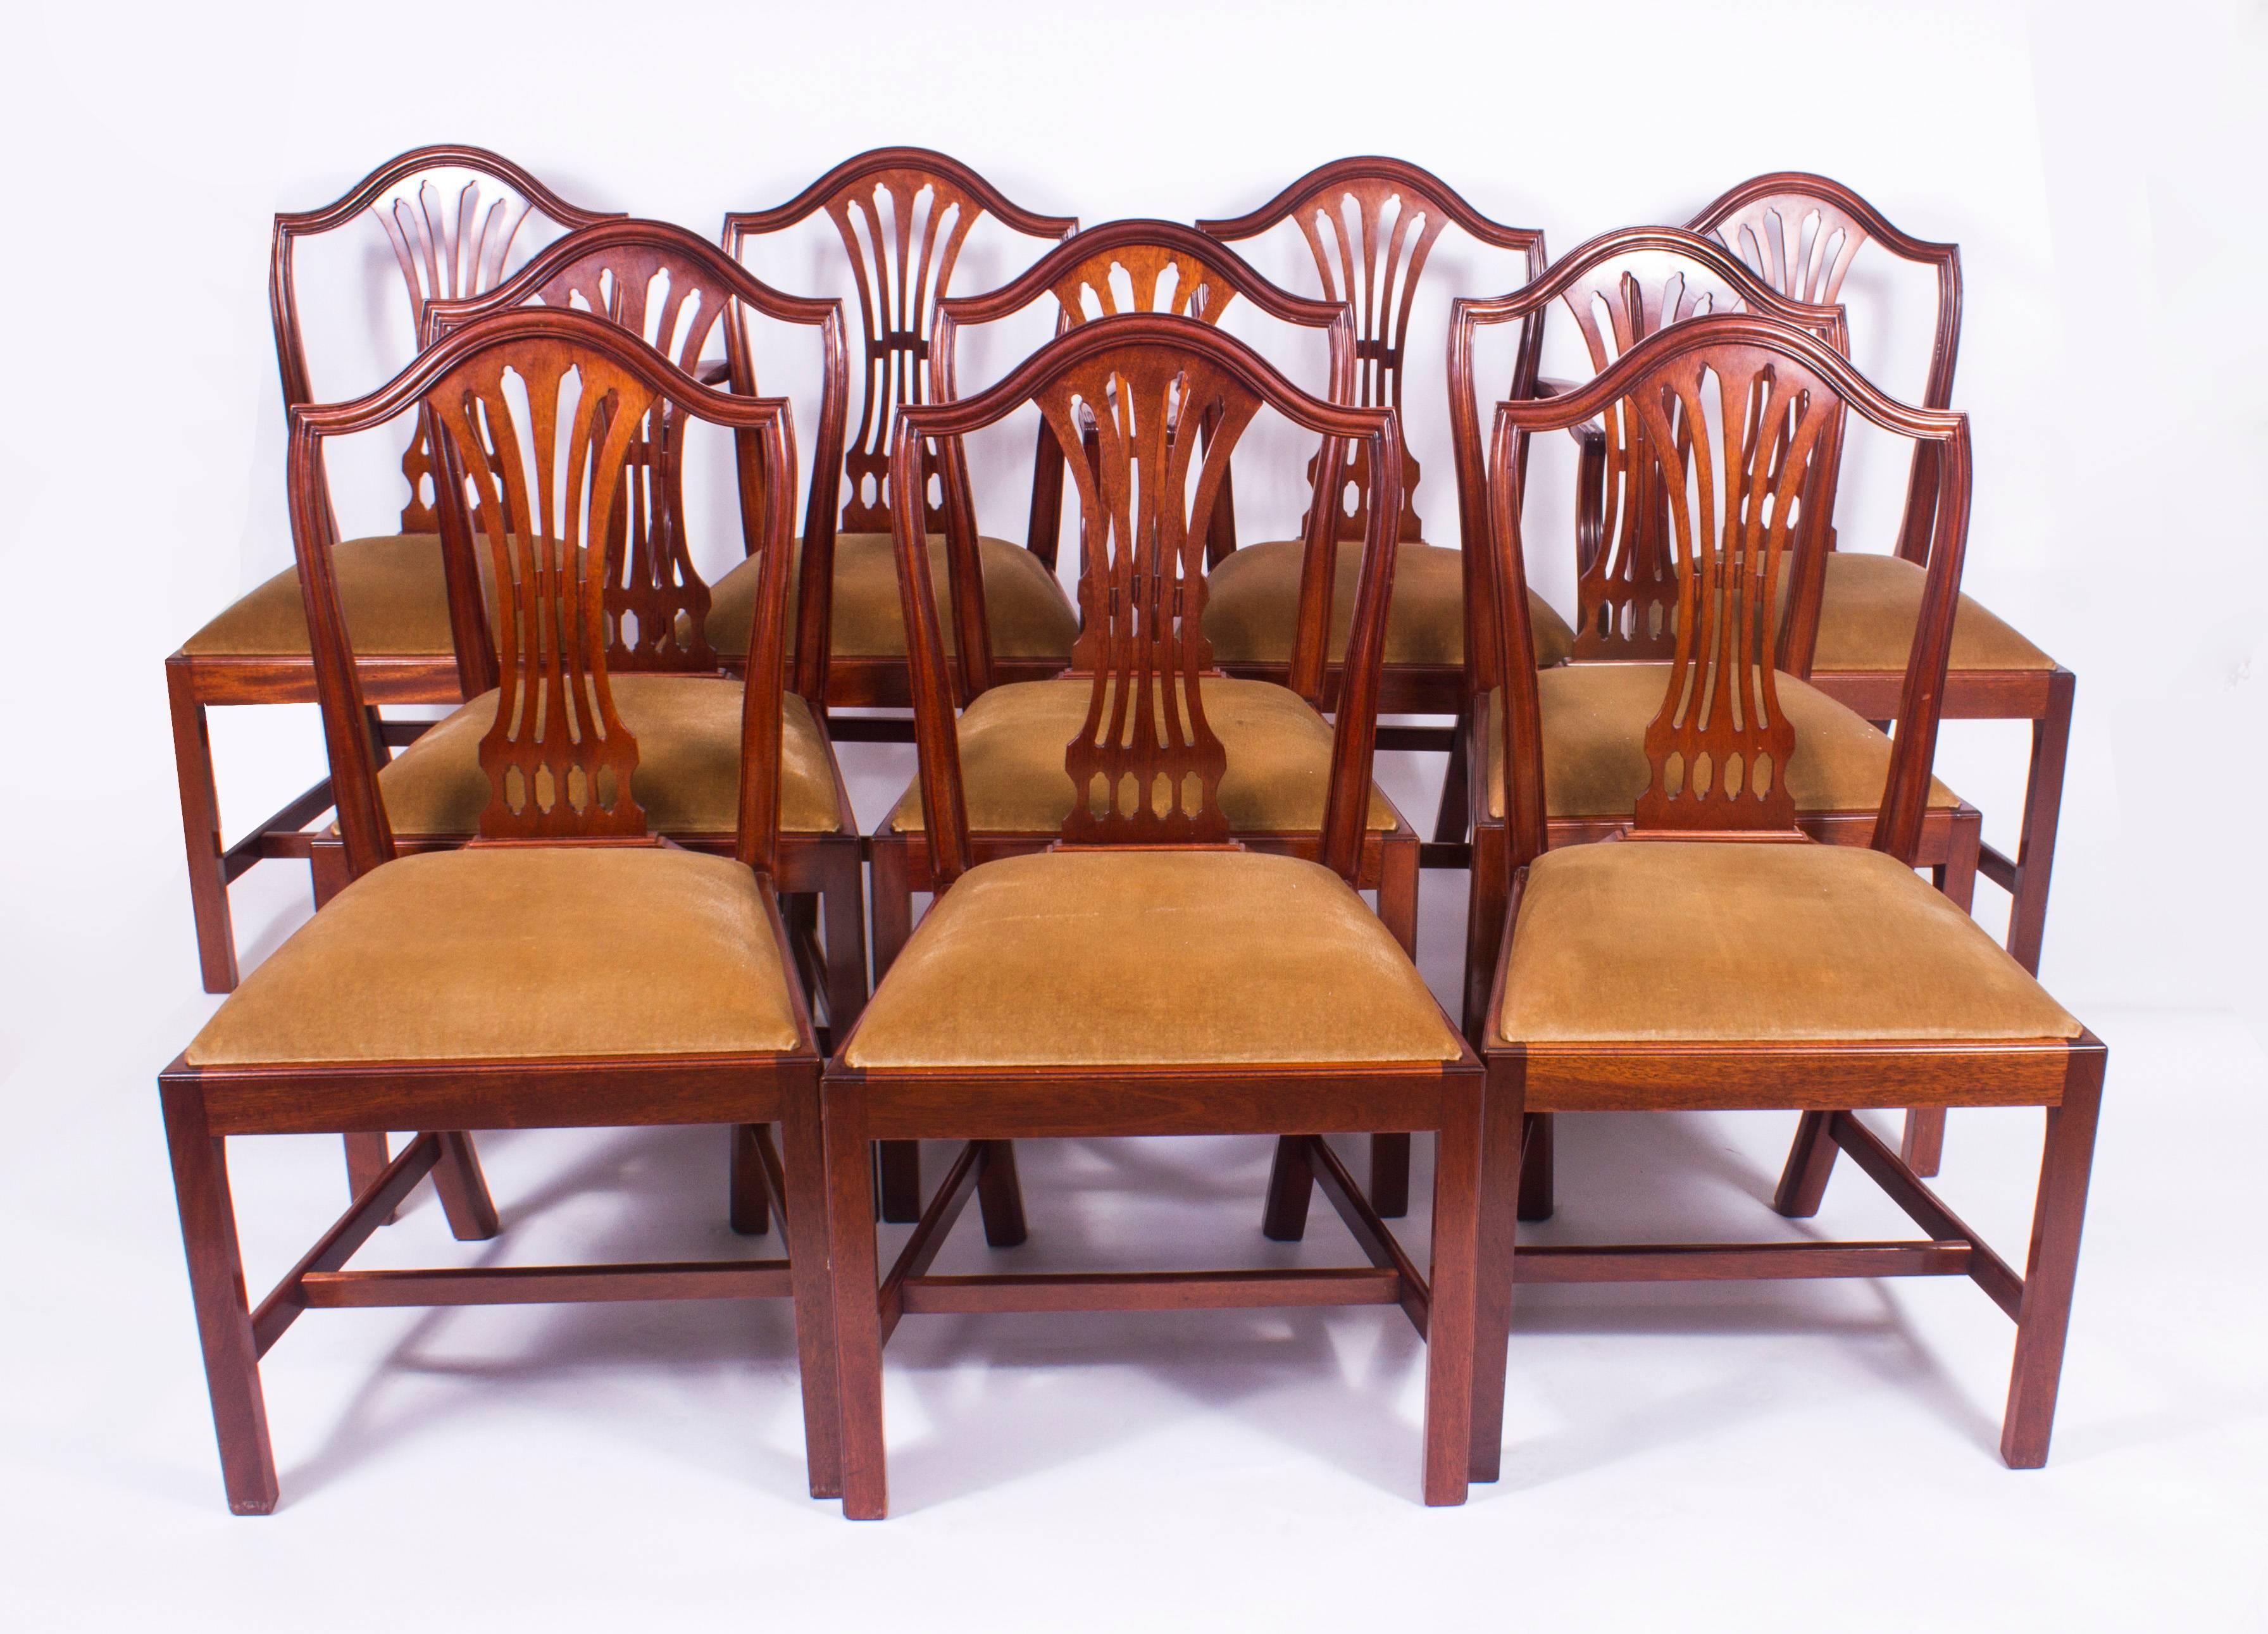 Mahogany Vintage William Tillman Regency Dining Table and Ten Chairs, Late 20th Century